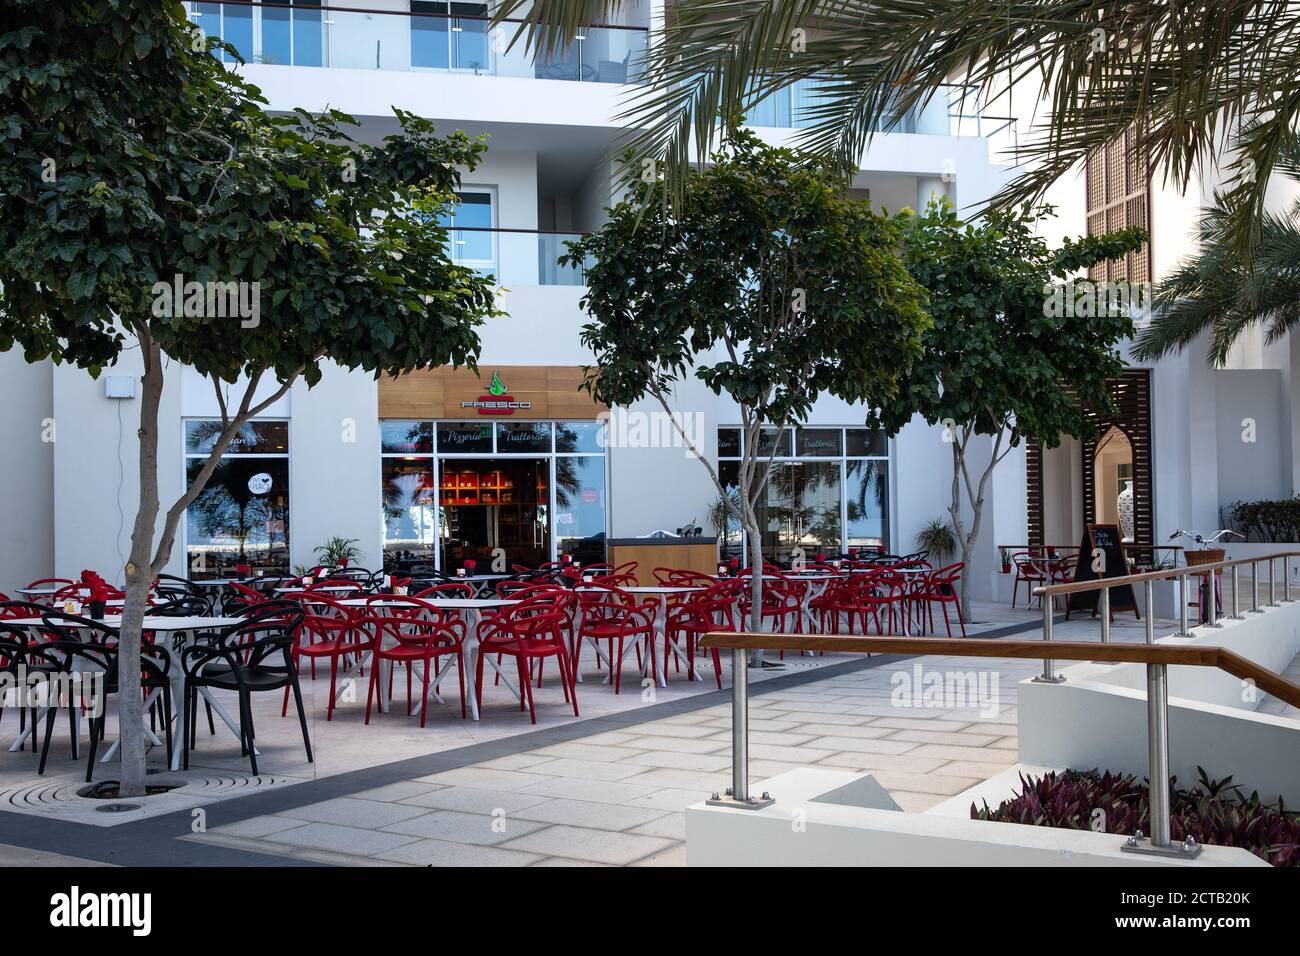 Seating area outside Fresco italian restaurant, close to the marina and residential buildings. Al Mouj, The Wave, Muscat, Sultanate of Oman. Stock Photo